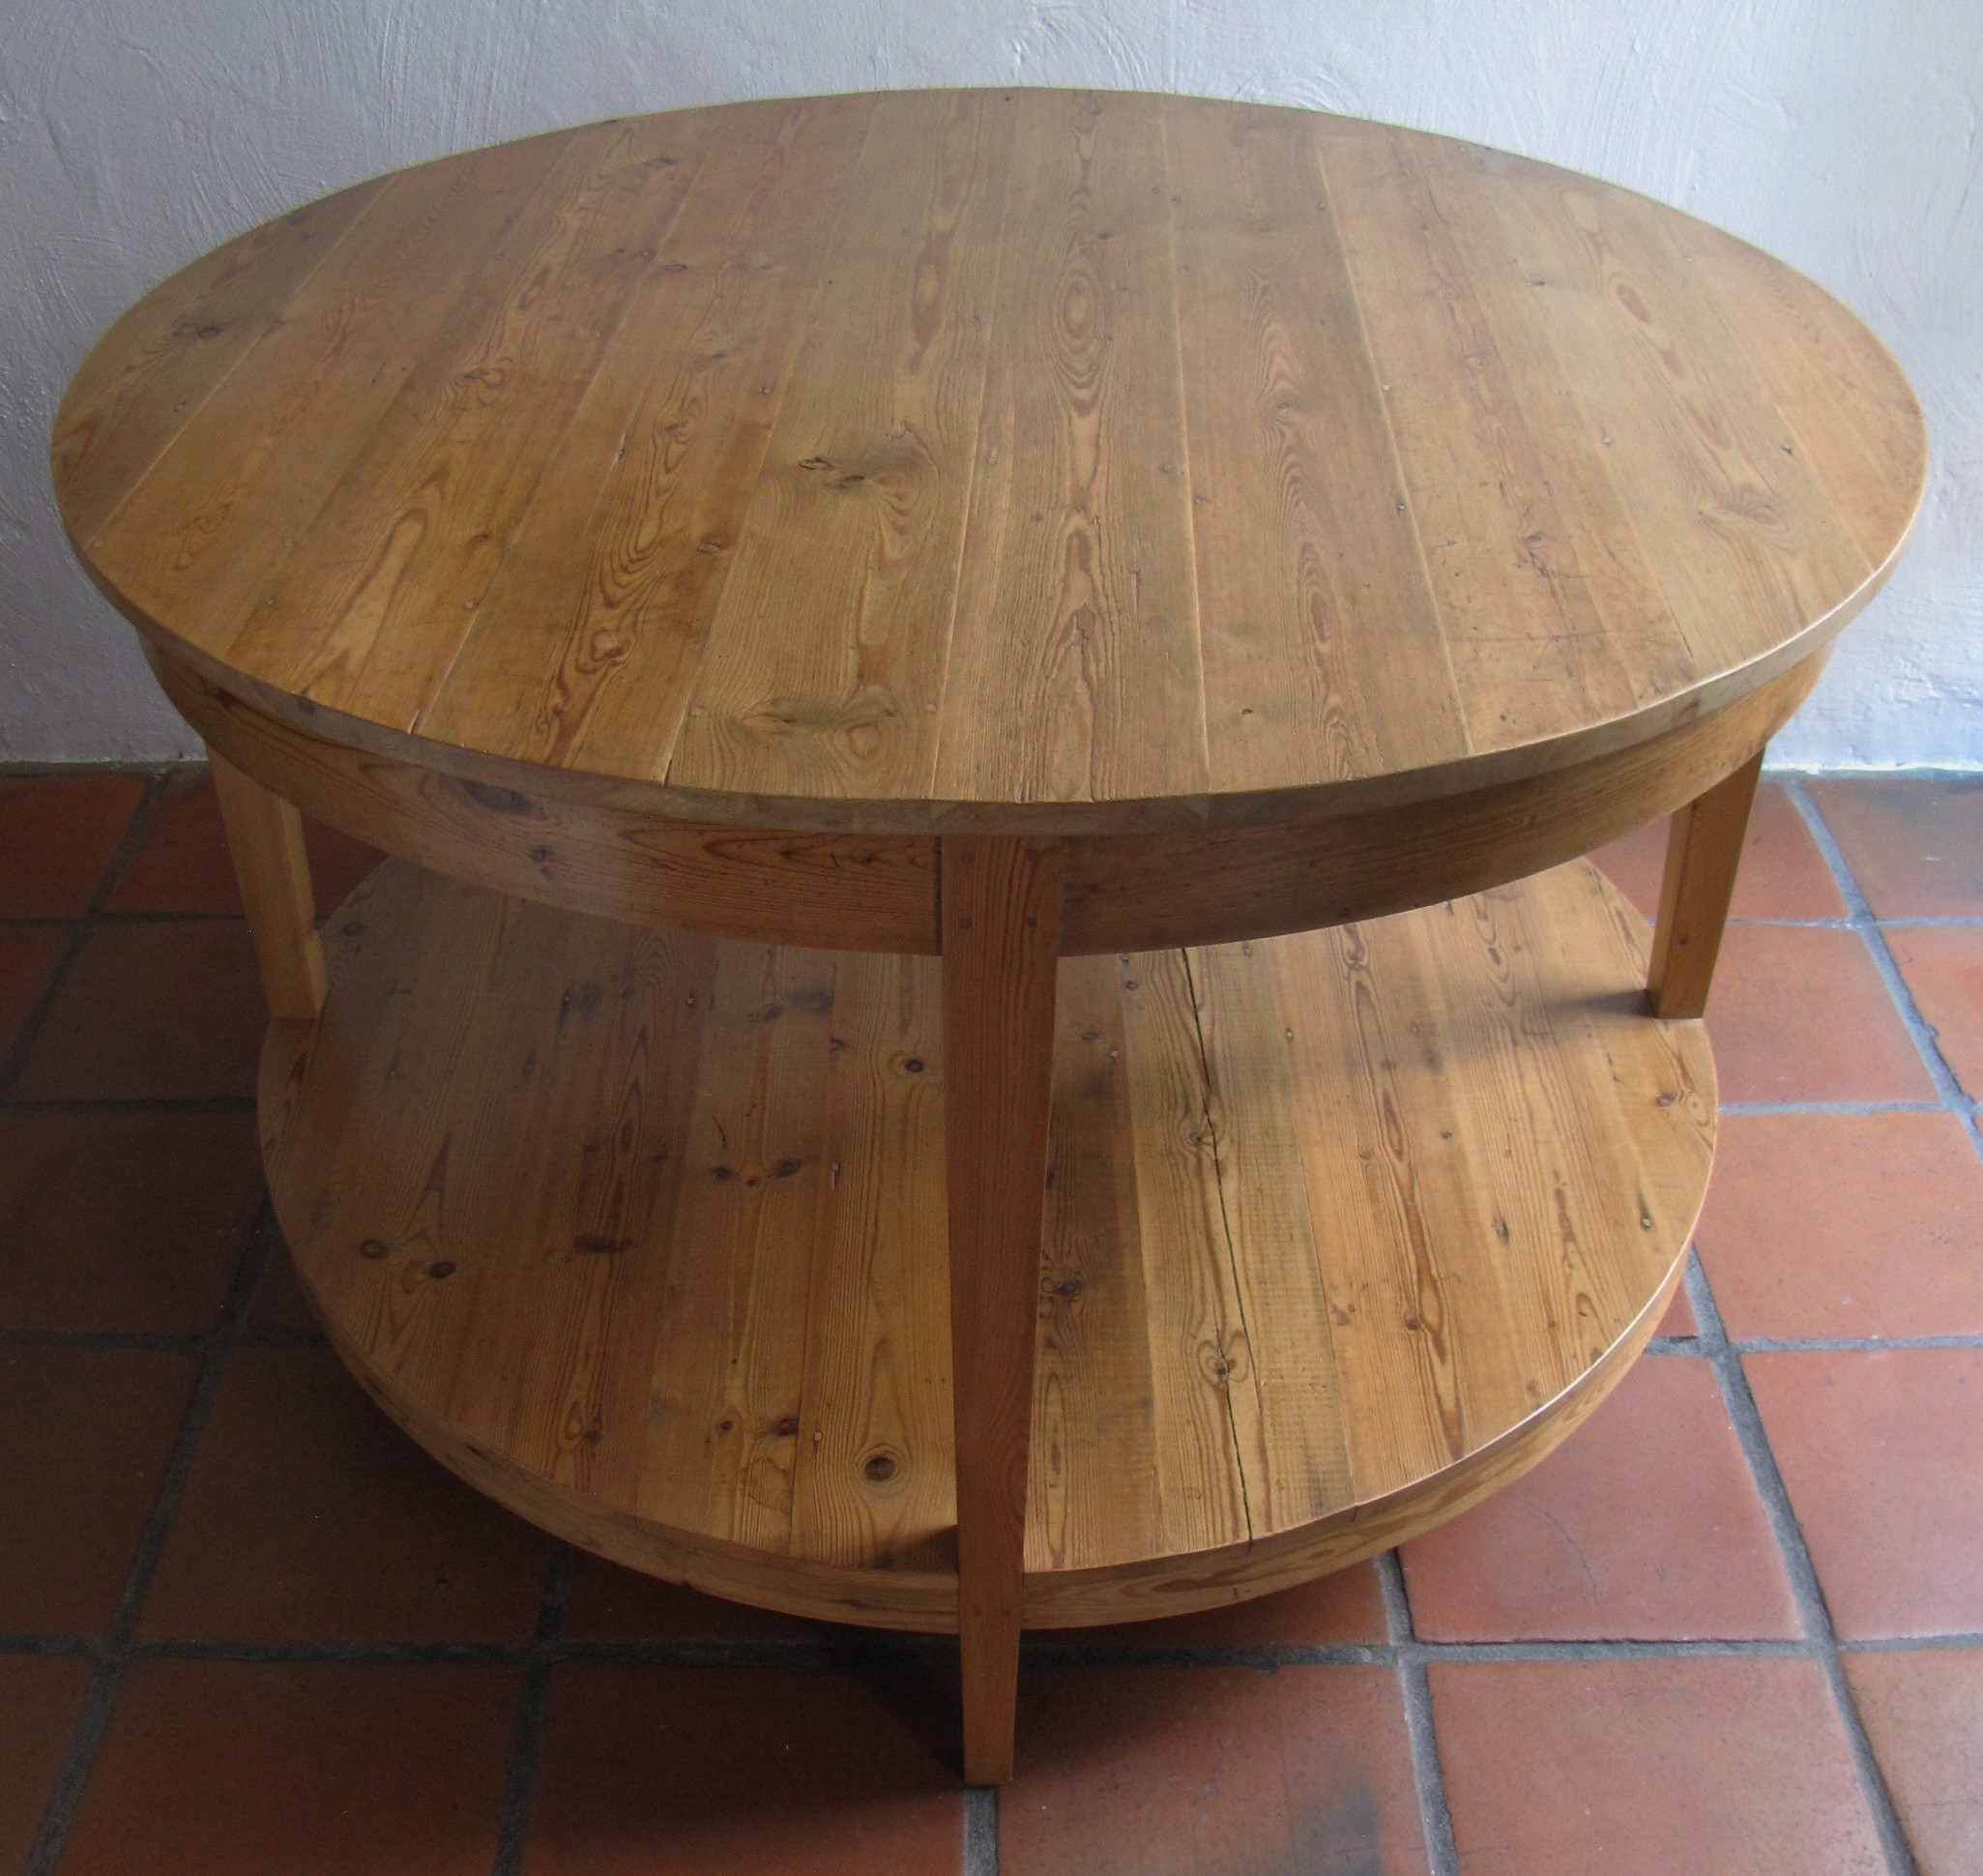 Round table with shelf made from reclaimed 19th century Oregon pine